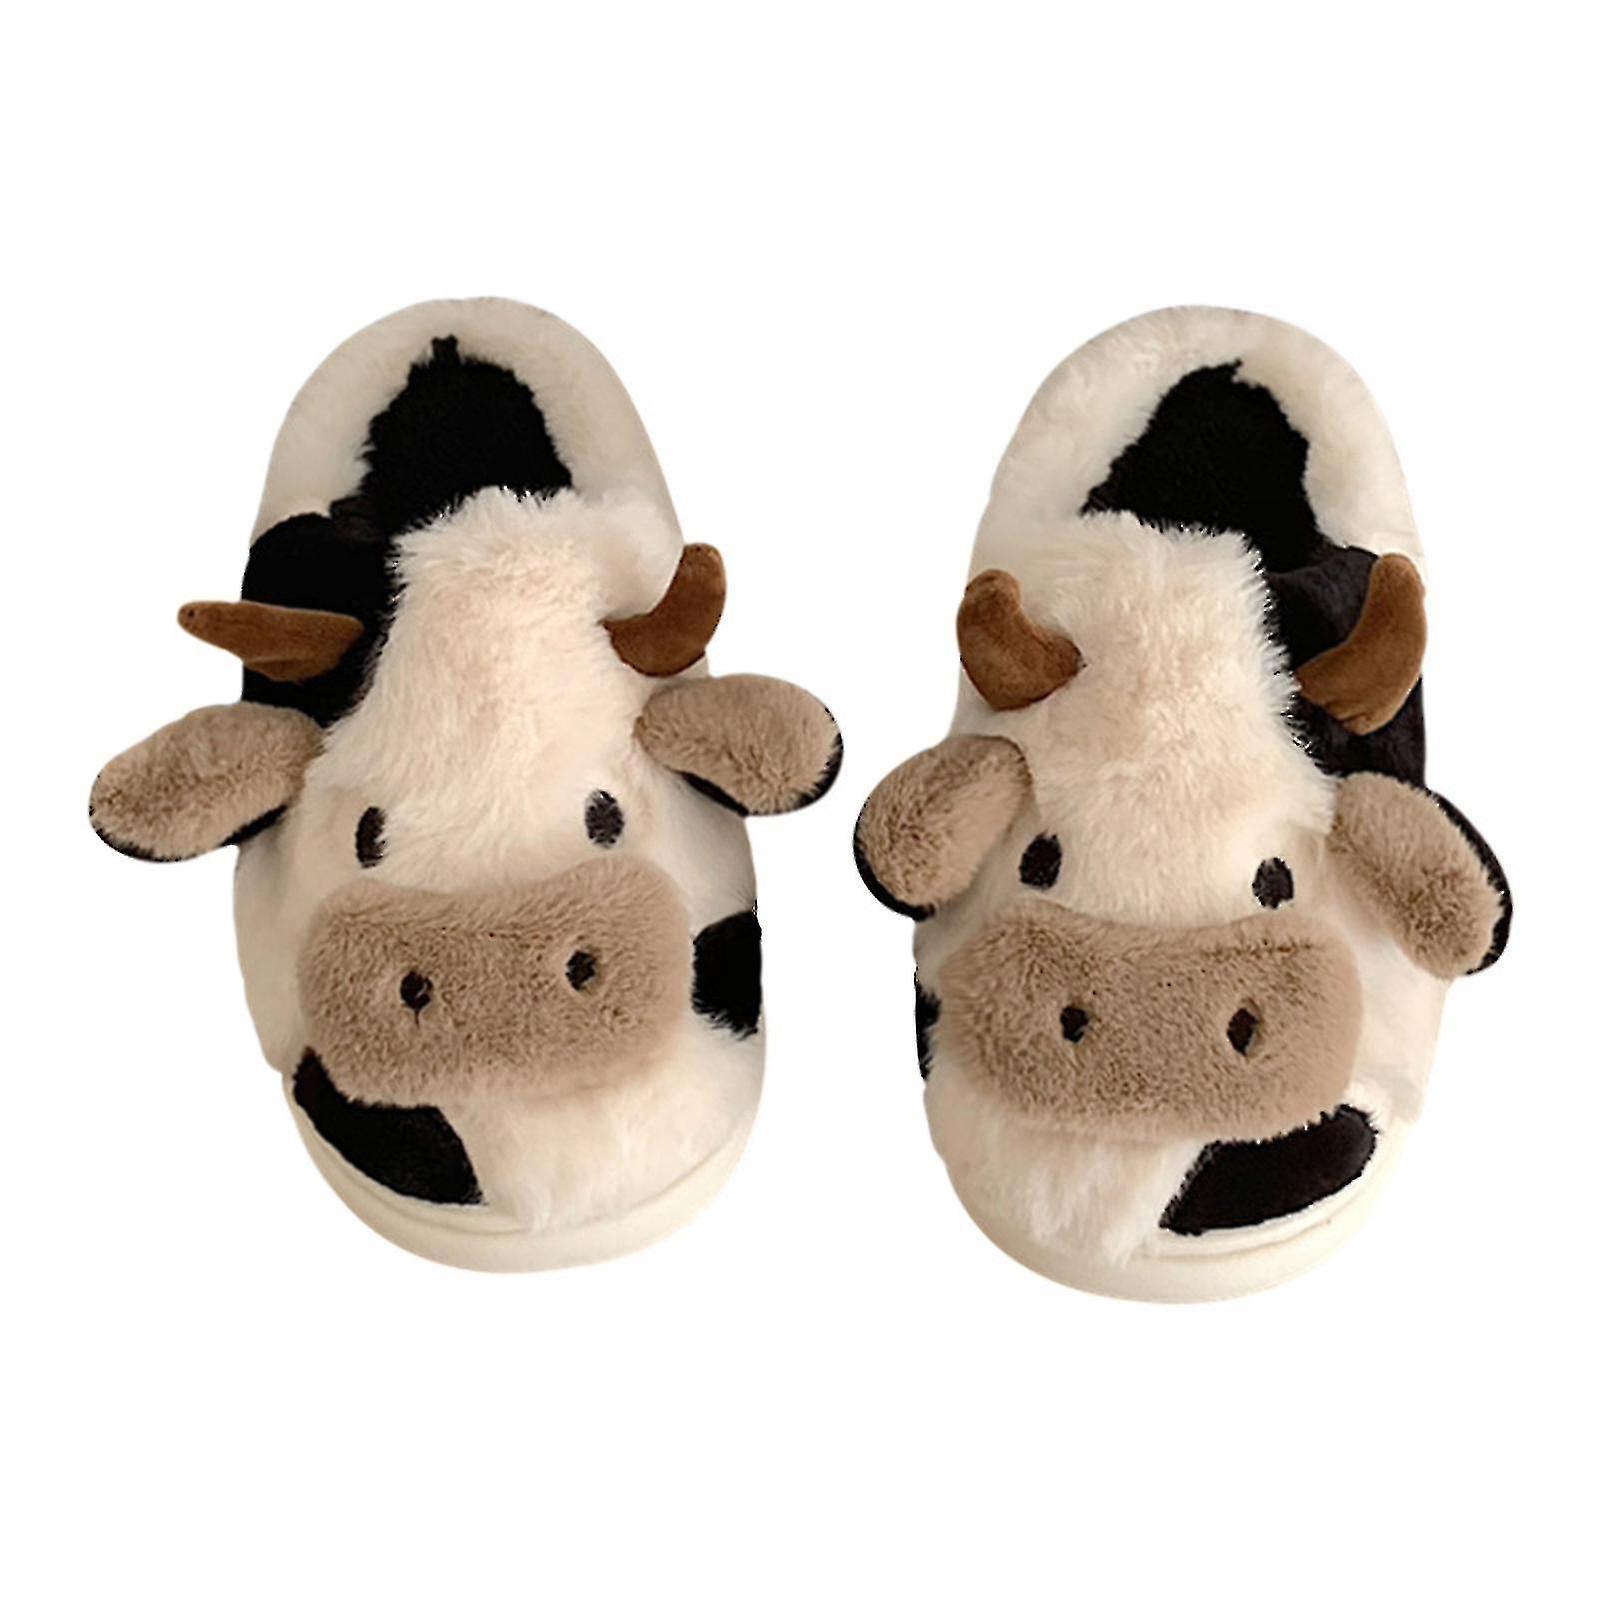 Fuzzy Cow Slippers Cute Warm Slippers Cozy Cotton Shoes Animal Shape ...